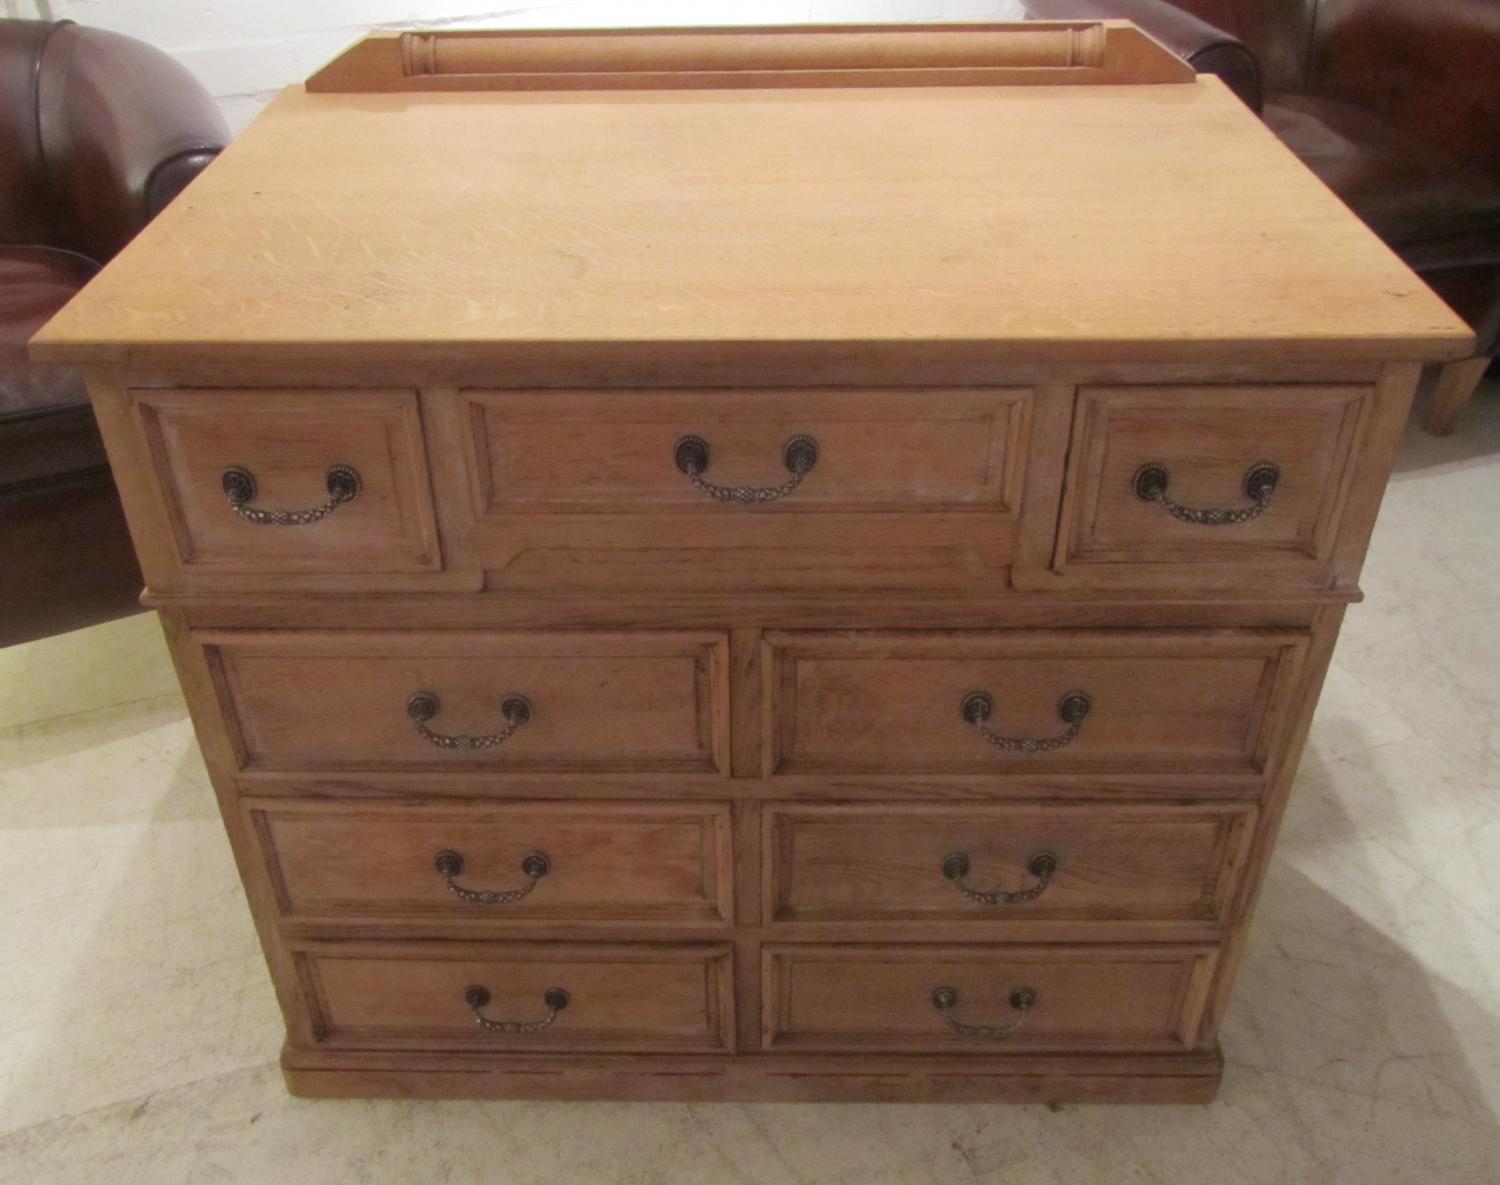 A 19thC ships chest of drawers